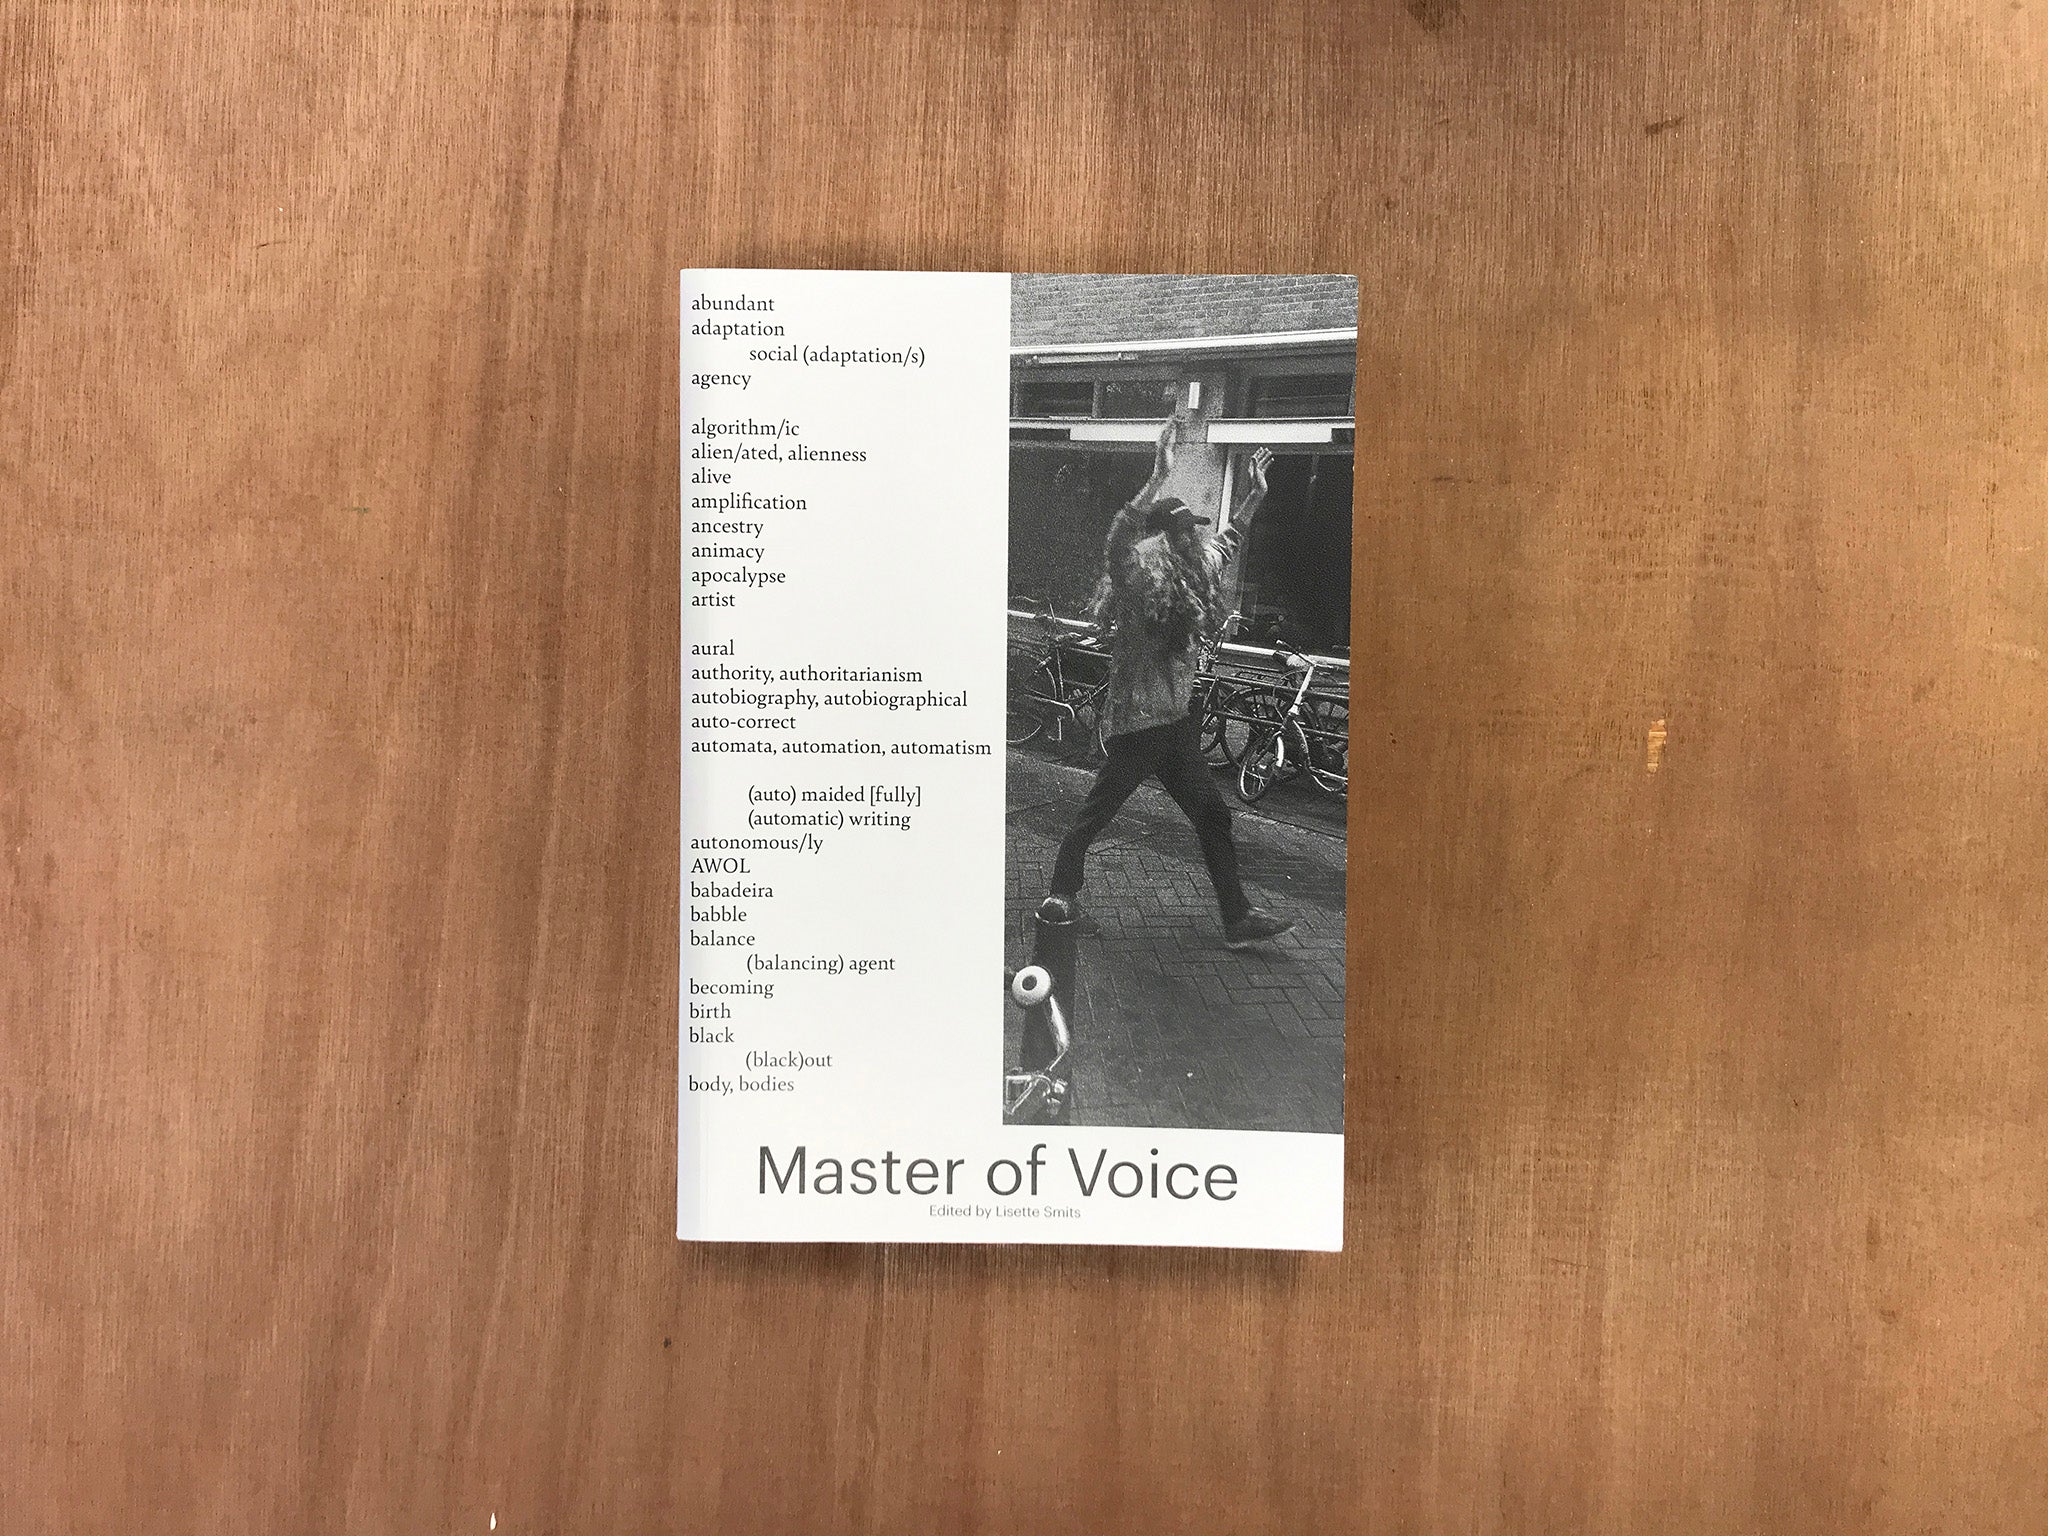 MASTER OF VOICE by Lisette Smiths